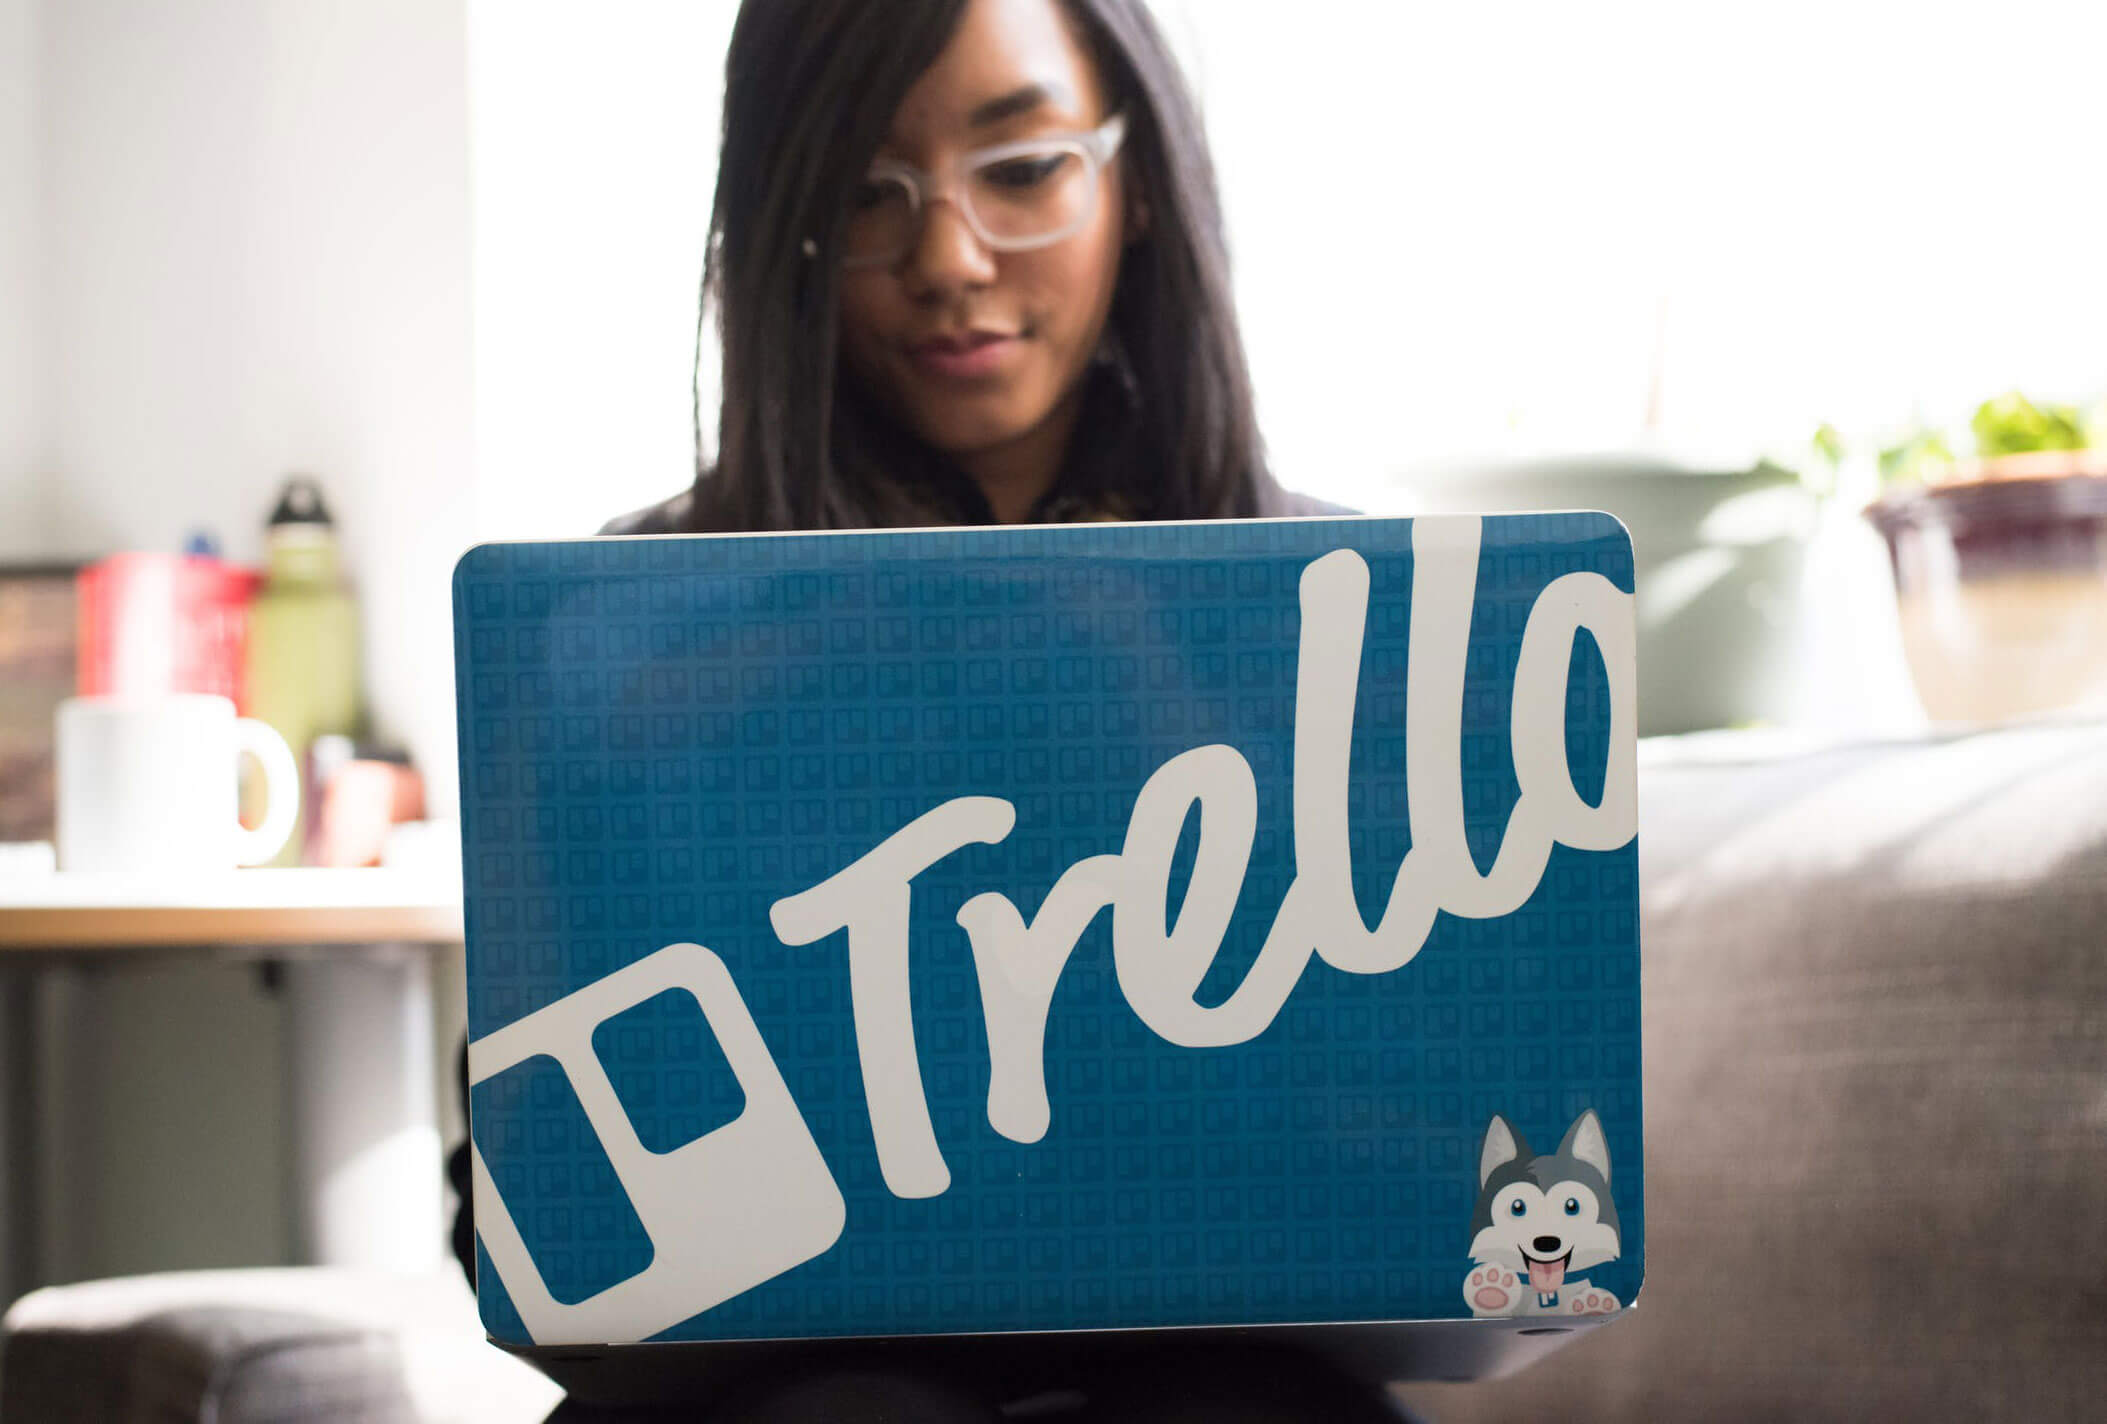 Trello being used to spread malware / spam